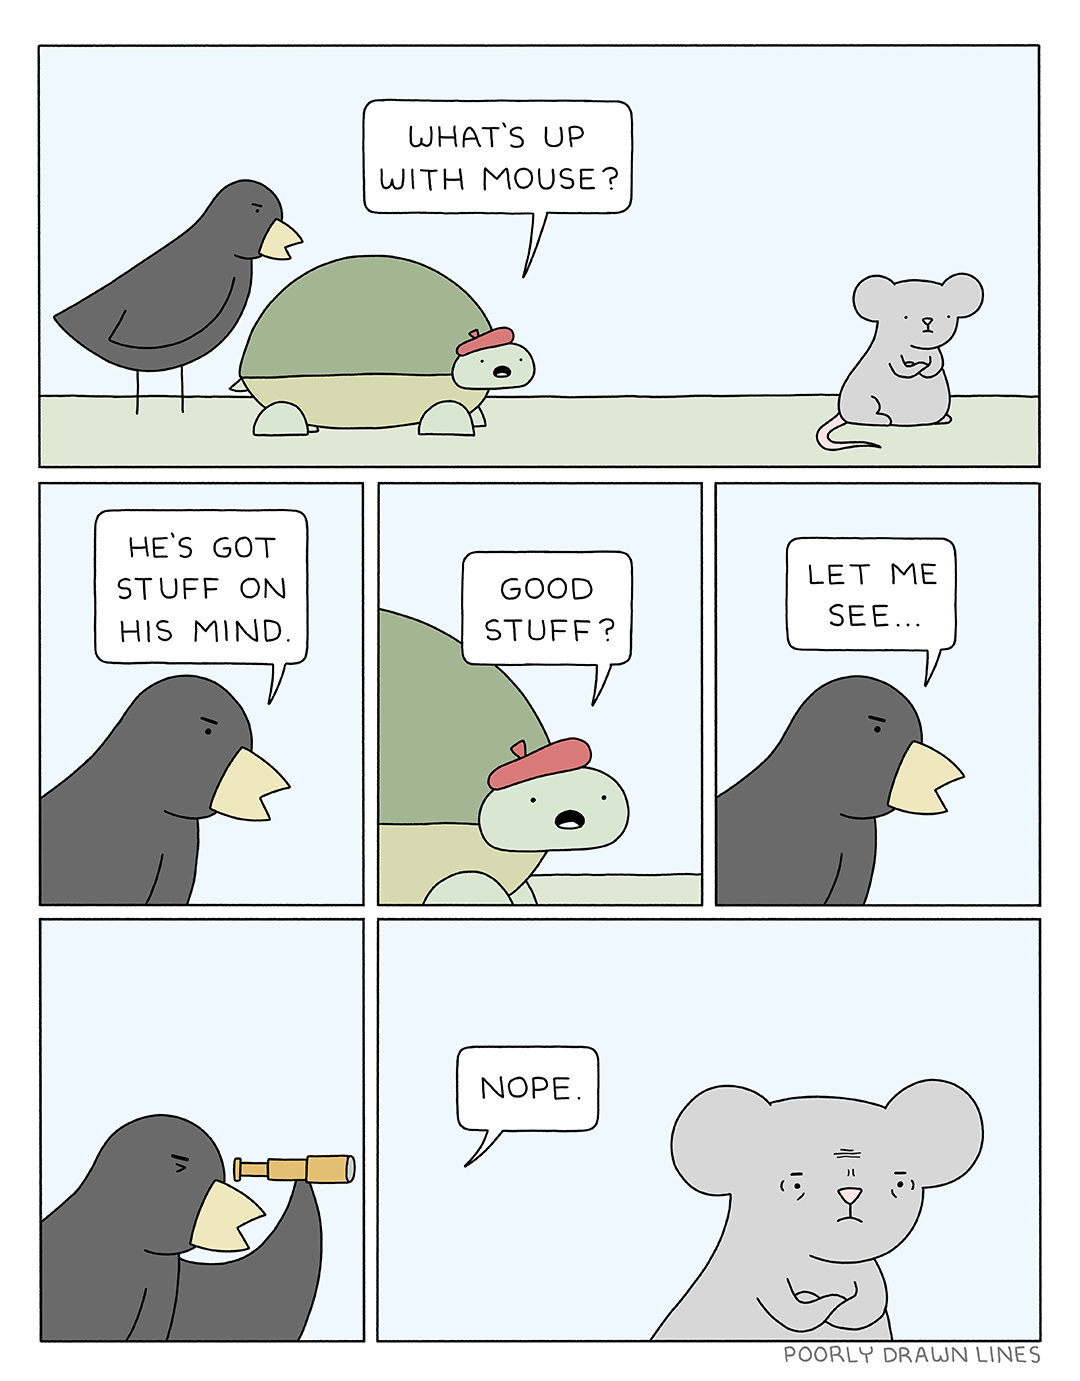 Poorly Drawn Lines - On his Mind